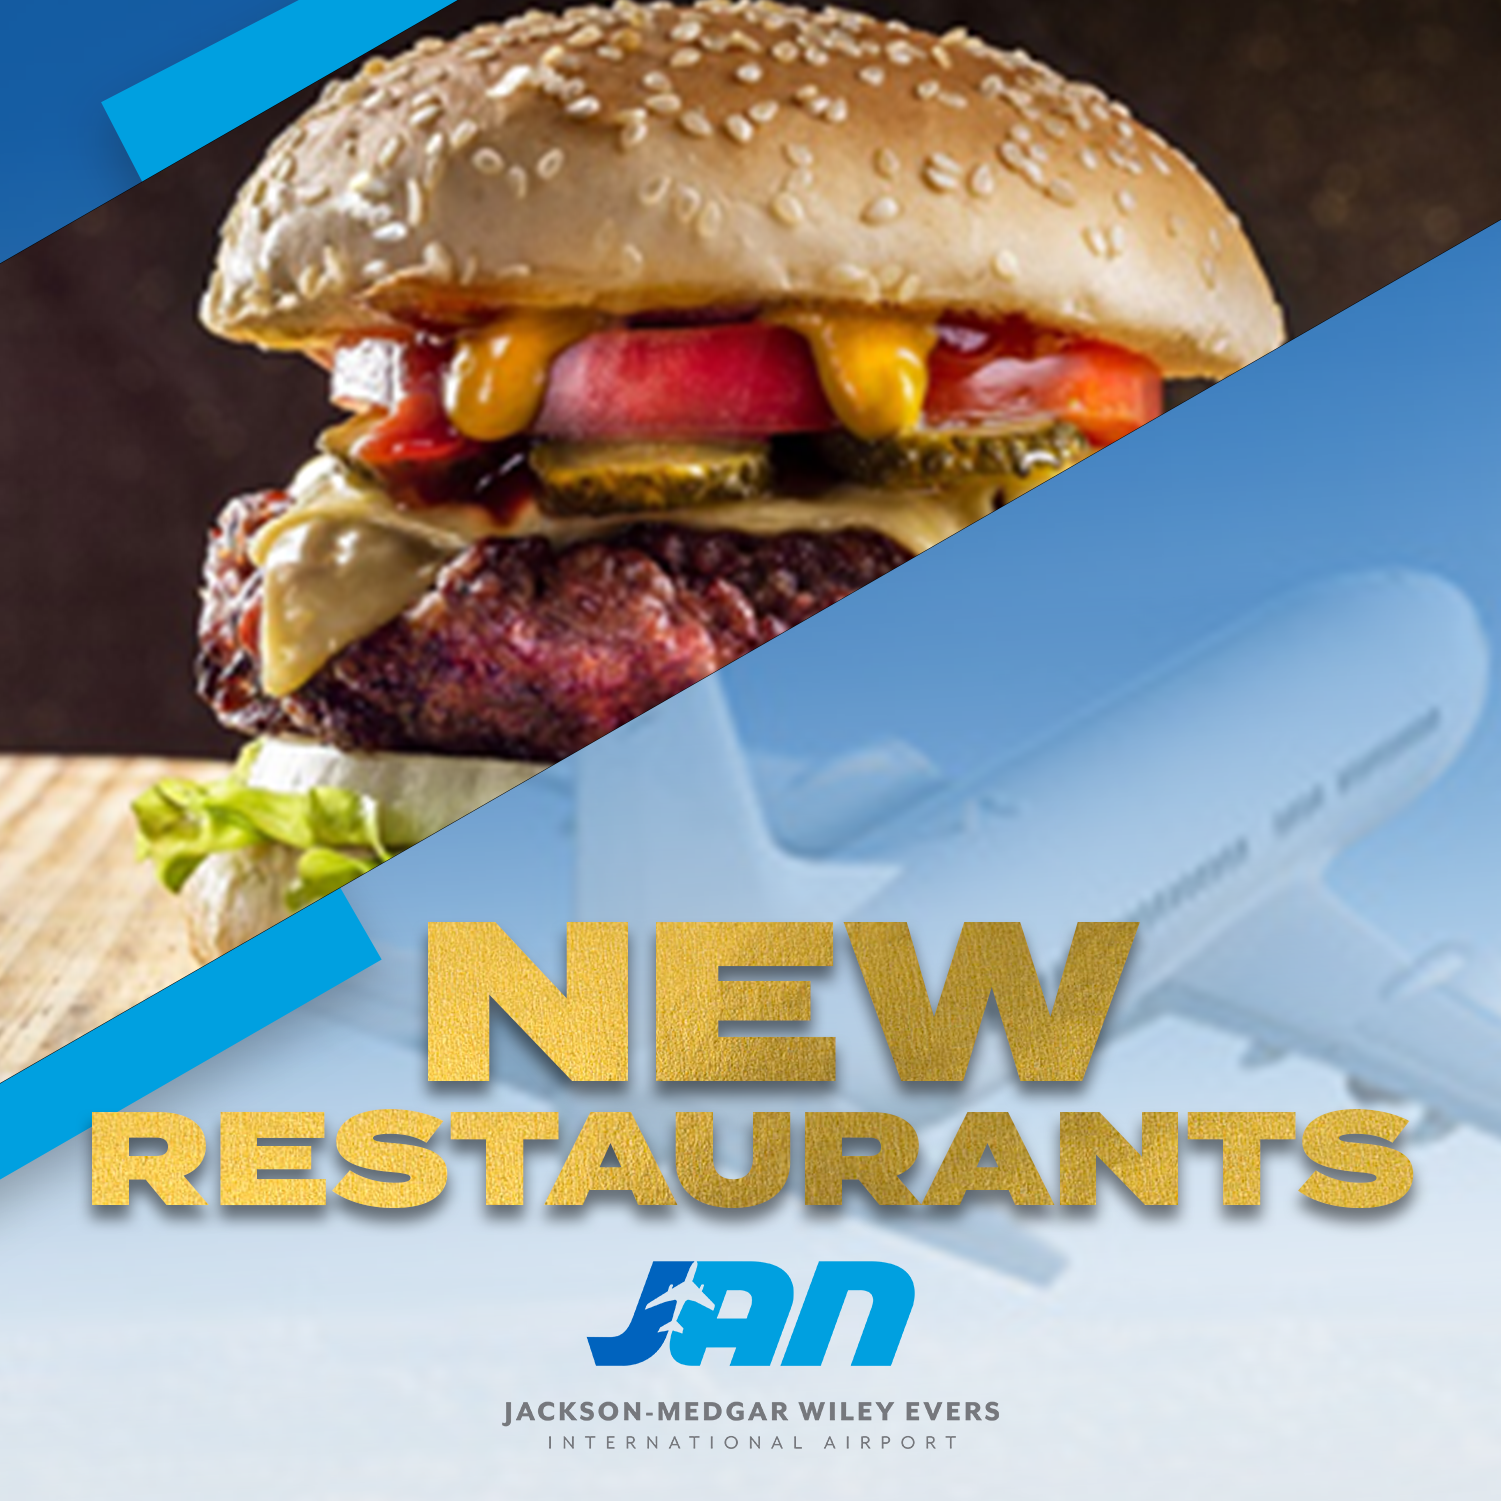 Jackson Municipal Airport Authority Announces the Opening of New Restaurants at Jackson-Medgar Wiley Evers International Airport